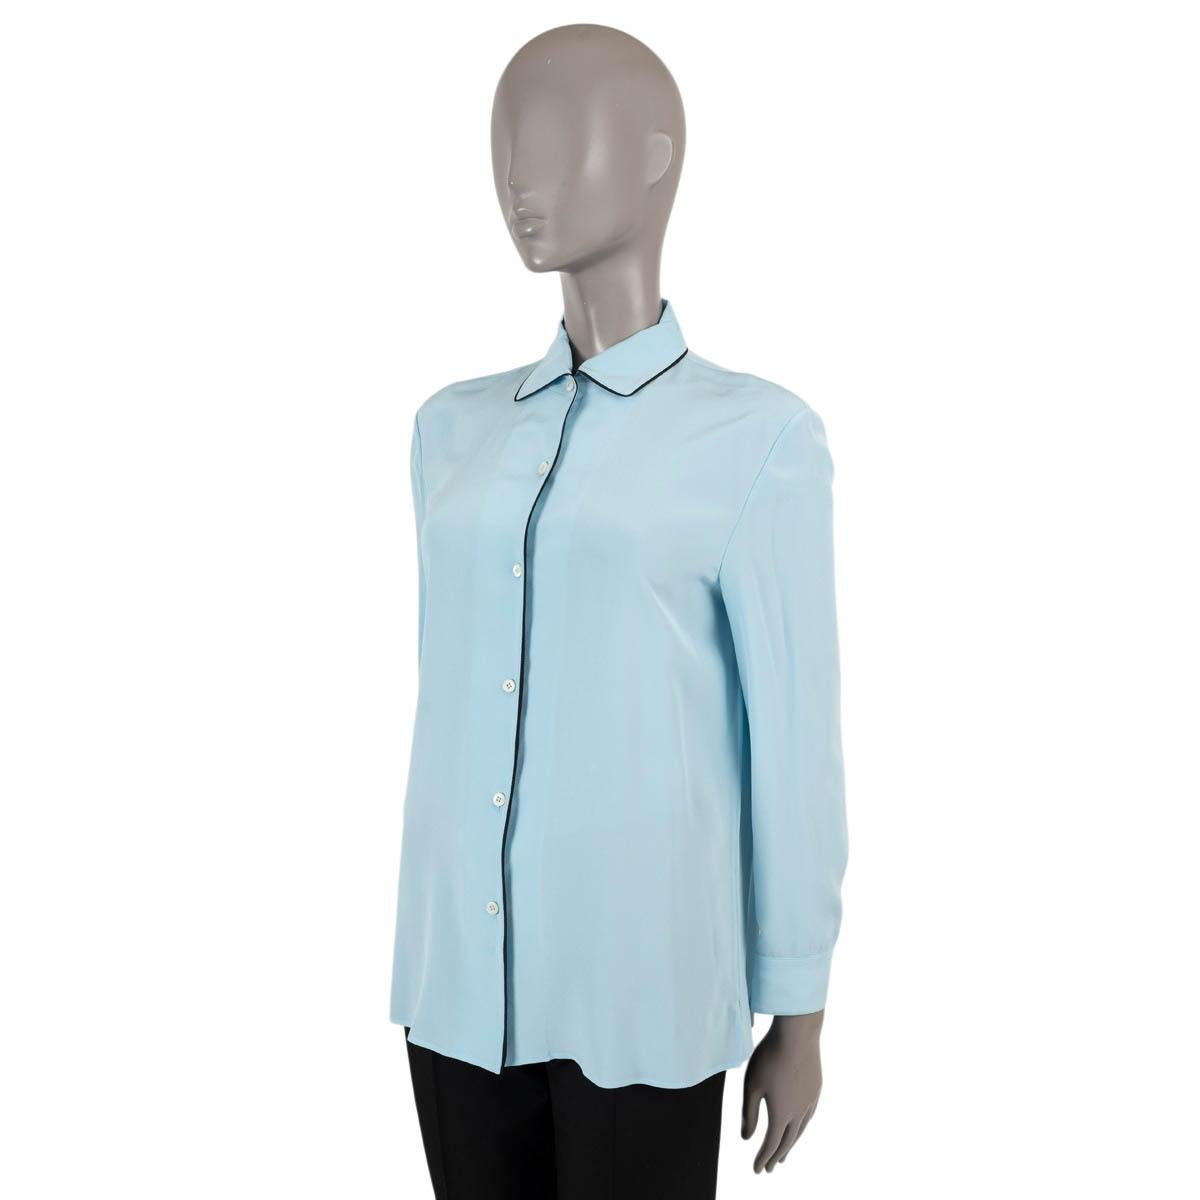 100% authentic Prada Classic blouse in light blue silk (100%) with black trim. Opens with buttons on the front. Unlined. Has been worn and is in excellent condition.

Measurements
Tag Size	40
Size	S
Shoulder Width	43cm (16.8in)
Bust From	100cm